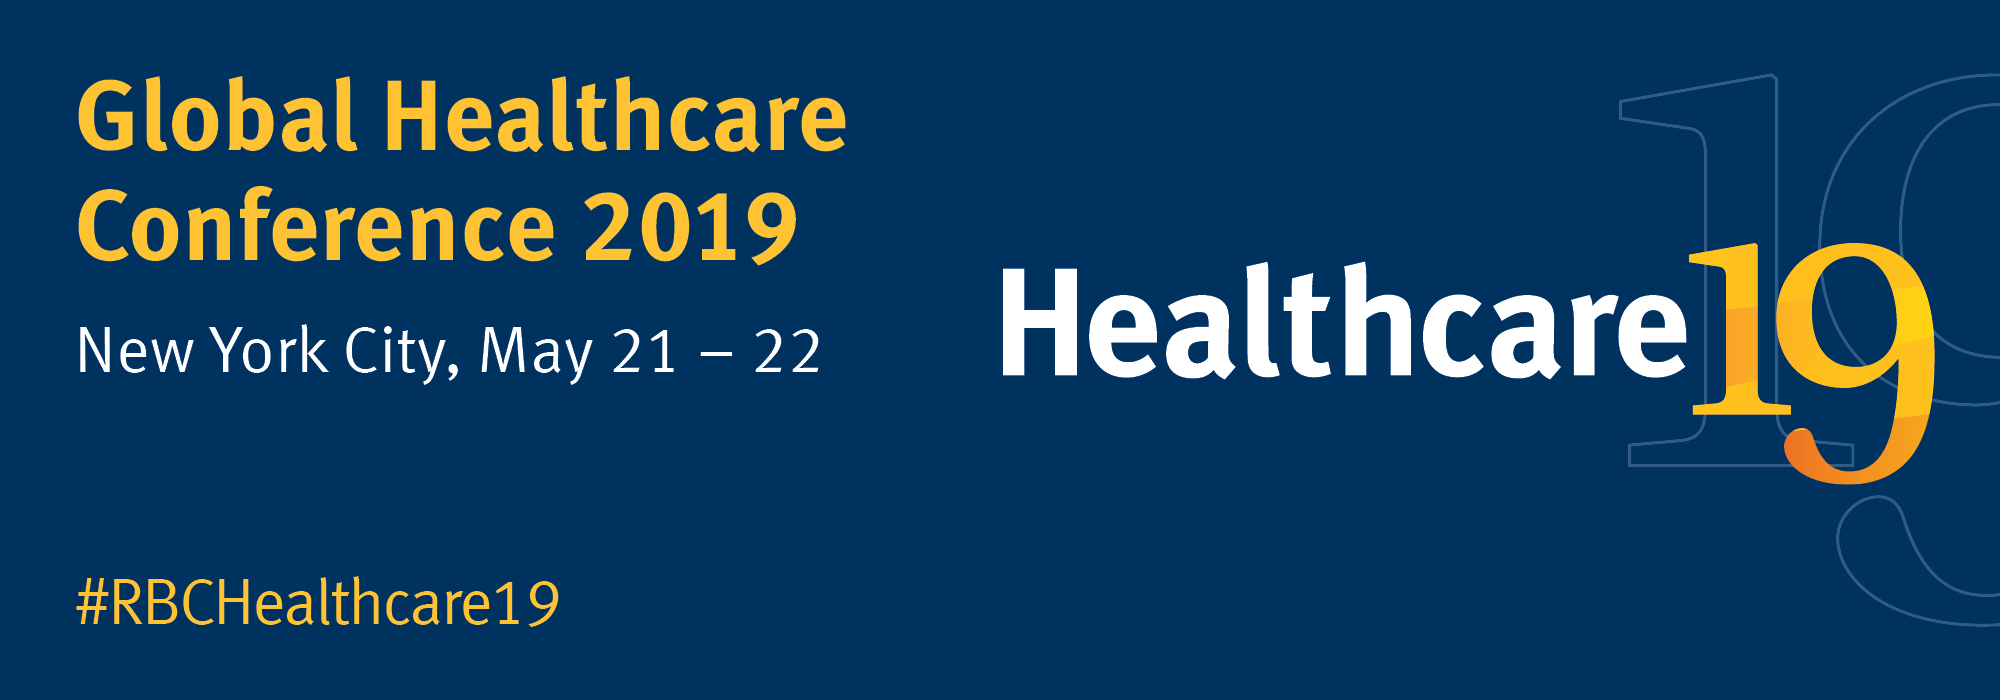 Global Healthcare Conference 2019 | New York City, May 21-22 | #RBCHealthcare19